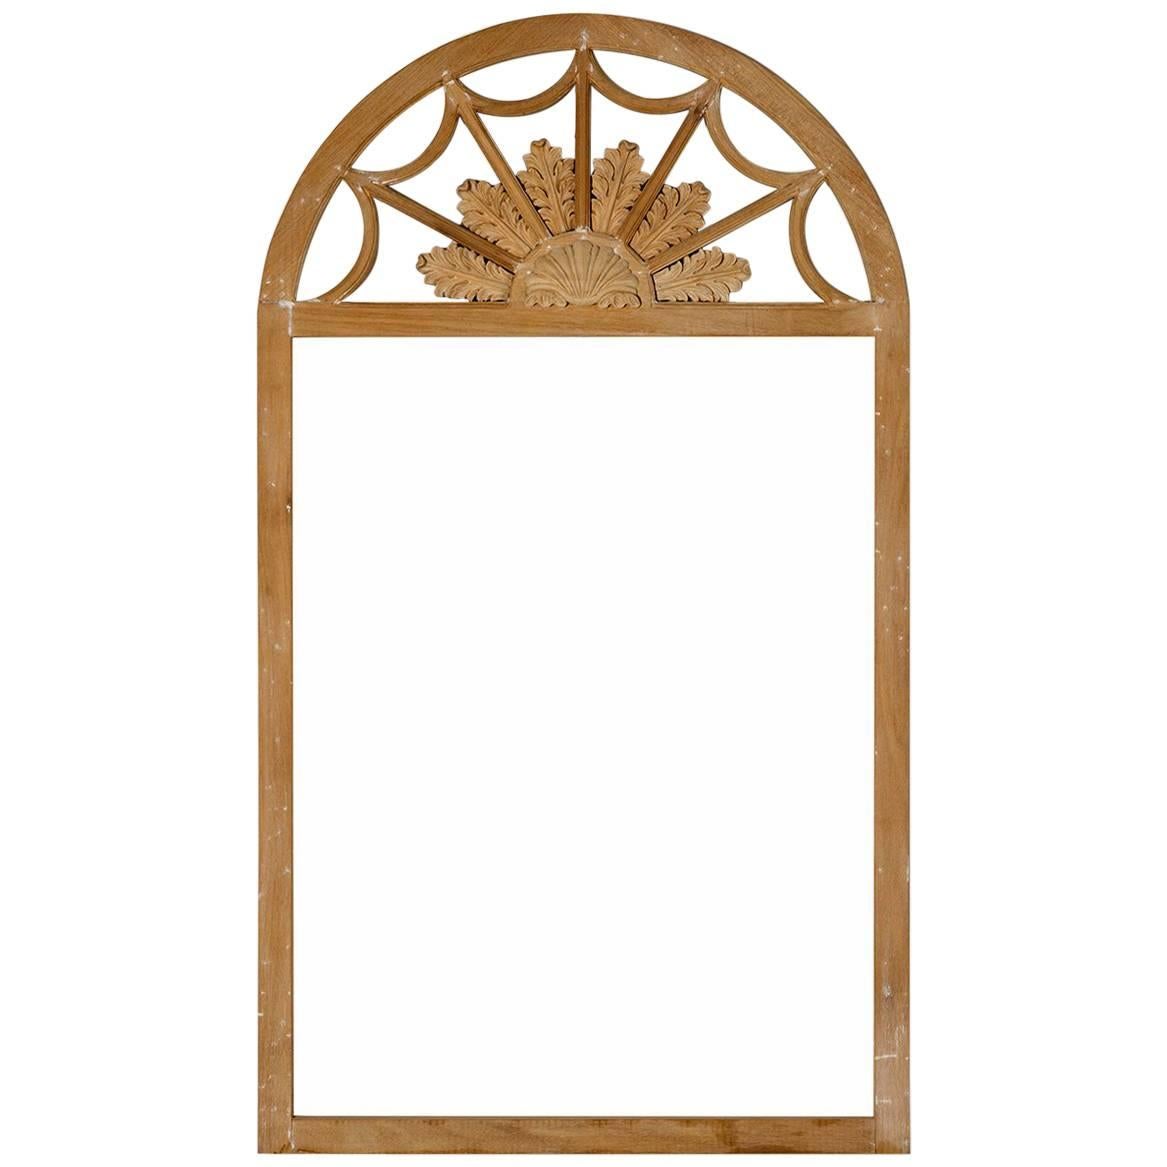 Queen Anne Style Frame Bleached Mahangony Field of Flower Crest